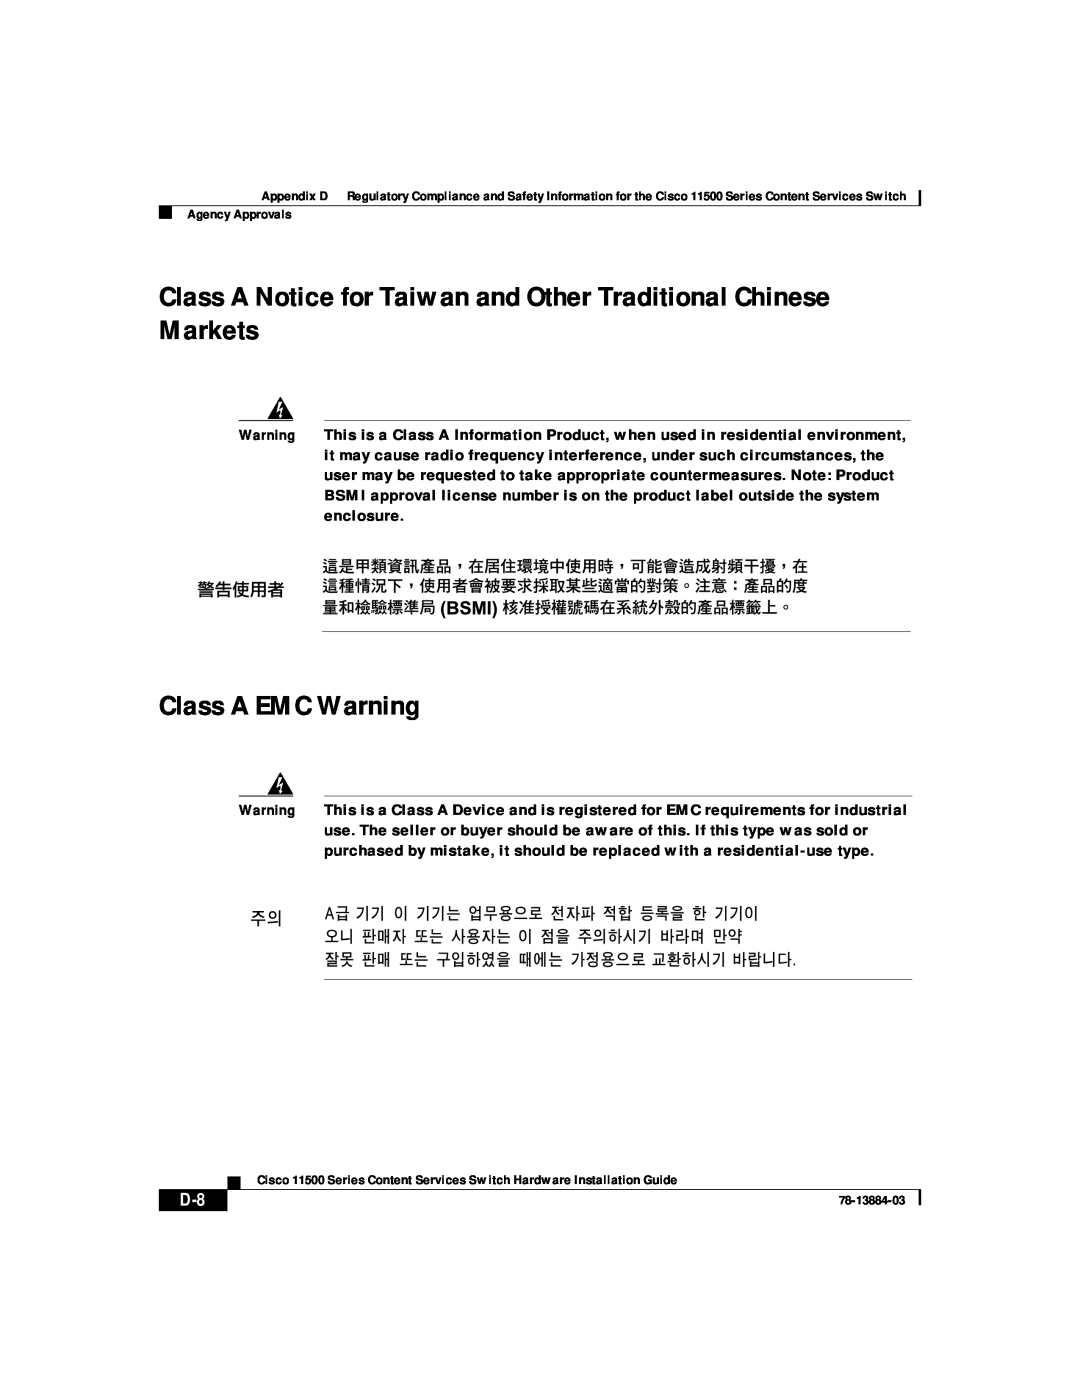 Cisco Systems 11500 Series manual Class A Notice for Taiwan and Other Traditional Chinese Markets, Class A EMC Warning 